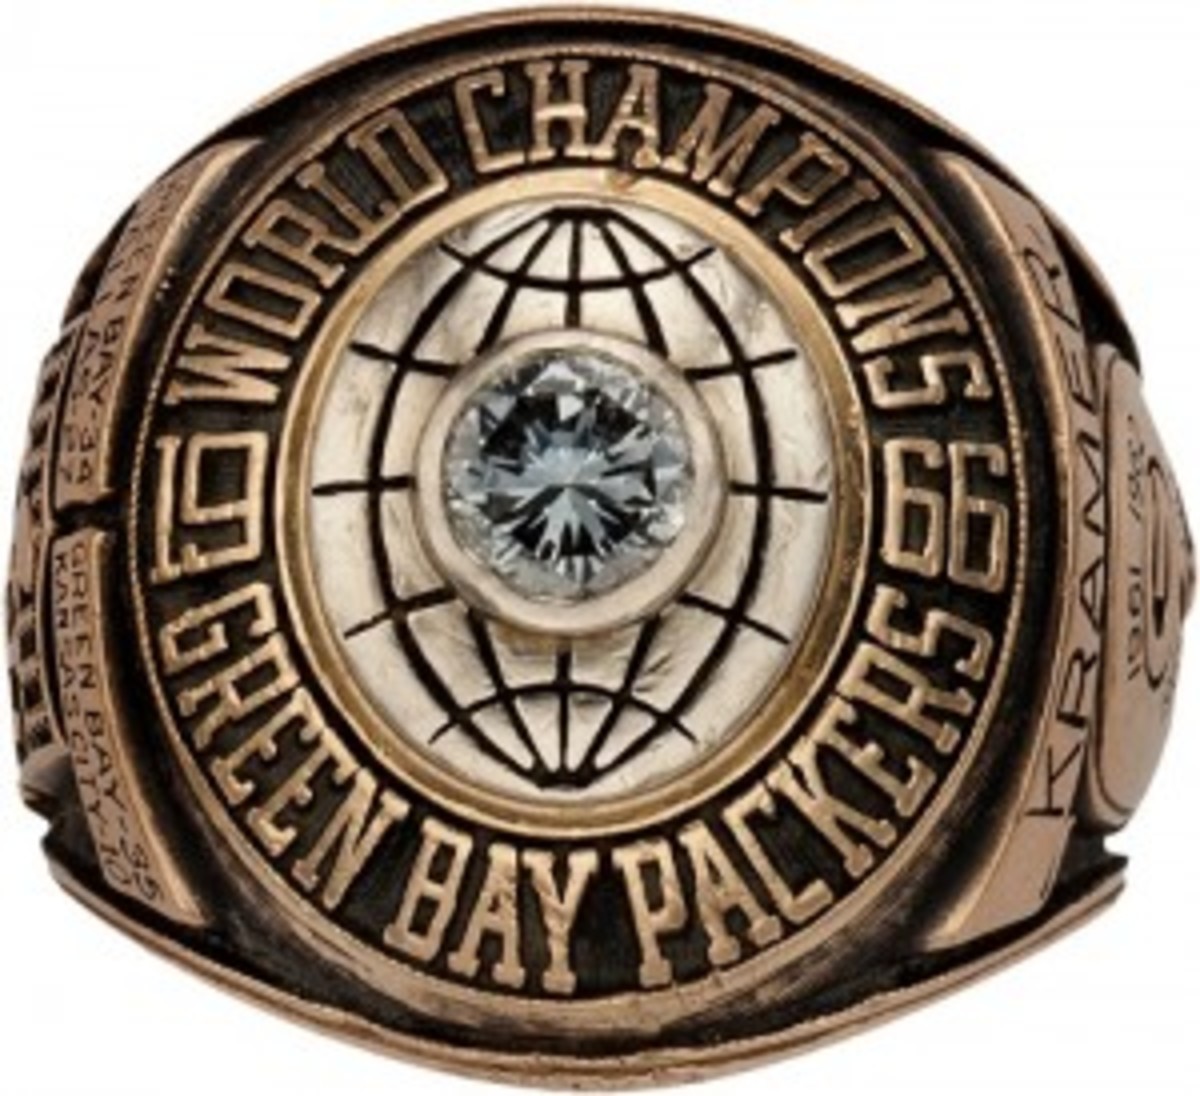 Jerry Kramer's 1966 Super Bowl ring, coming to auction 